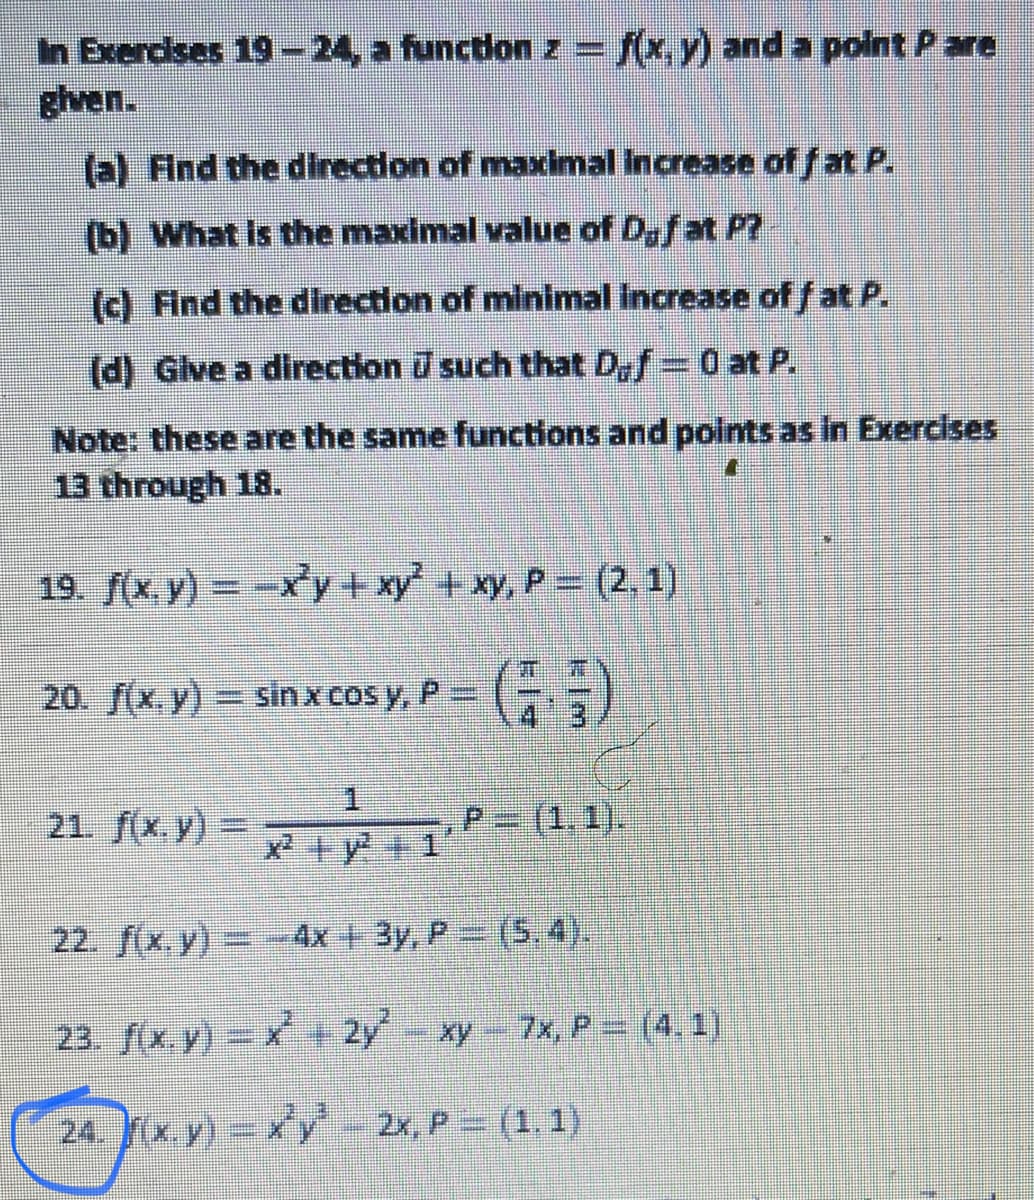 In Exercises 19-24, a function z = f(x, y) and a polnt P are
%3D
(a) Find the direction of maxcimal Increase of f at P.
(b) What Is the maximal value of D,fat P?
(c) Find the direction of minimal Increase of f at P.
(d) Glve a direction such that Def= 0 at P.
Note: these are the same functions and points as in Exercises
13 through 18.
19. f(x y) -x'y +xy' +xy, P (2,1)
20. f(x,y) sinx cos y, P= (
3.
1.
21. f(x. y) =D
P=(1,1).
x +y+1
22. (x, y)= 4x + 3y, P (5.4).
23. f(x.y) + 2y xy 7x, P= (4. 1)
24. x y)= y - 2x, P (1, 1)
